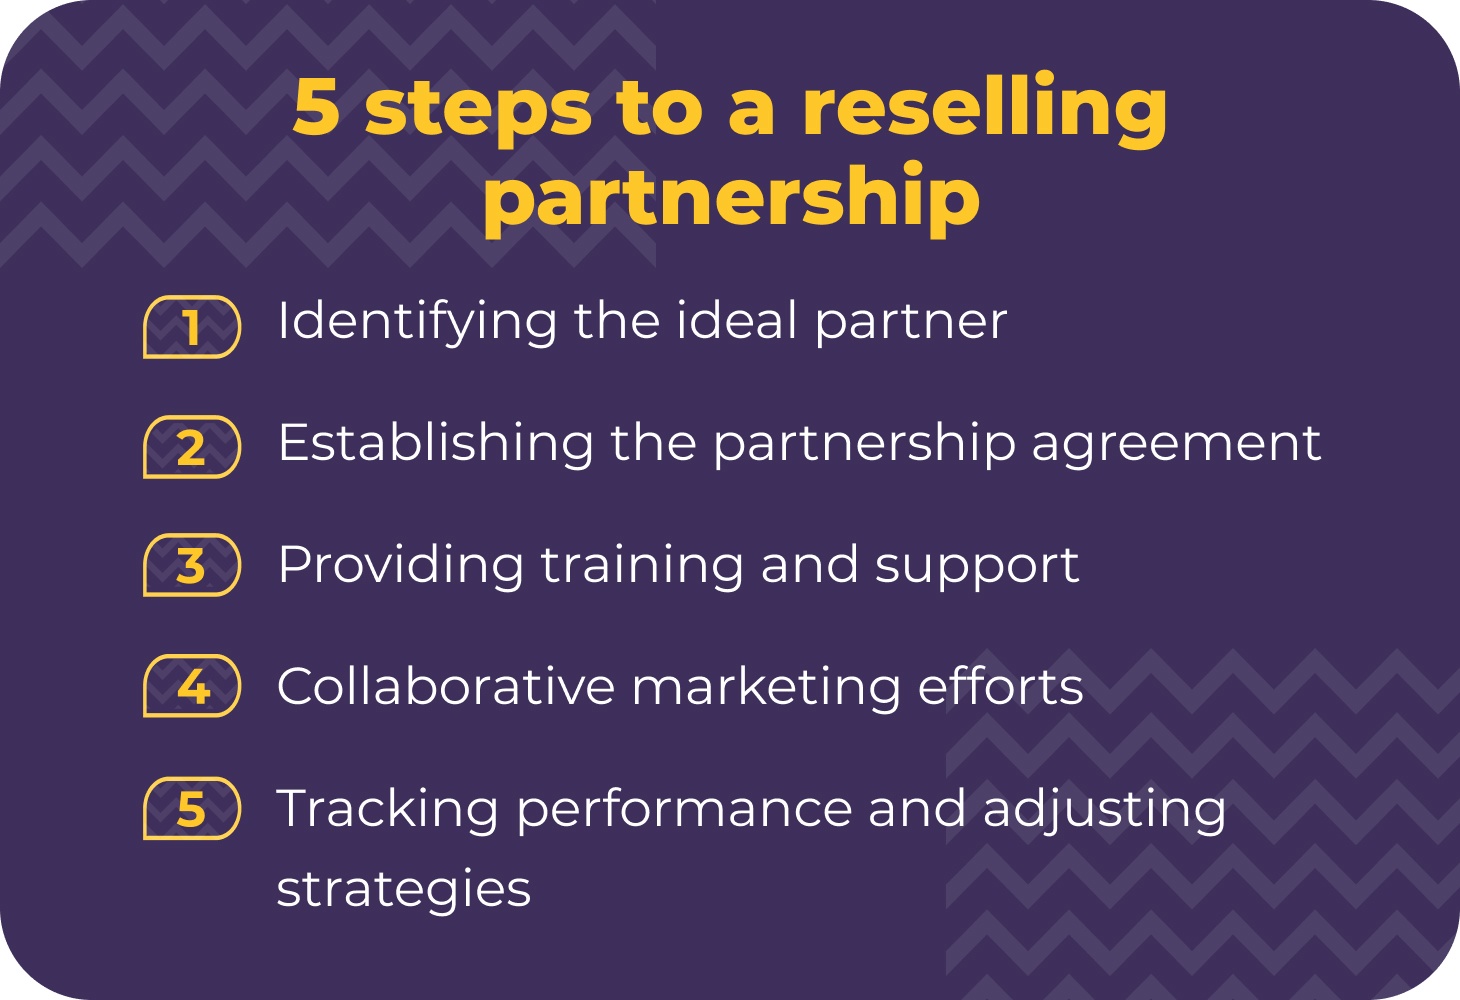 5 steps to a reselling partnership